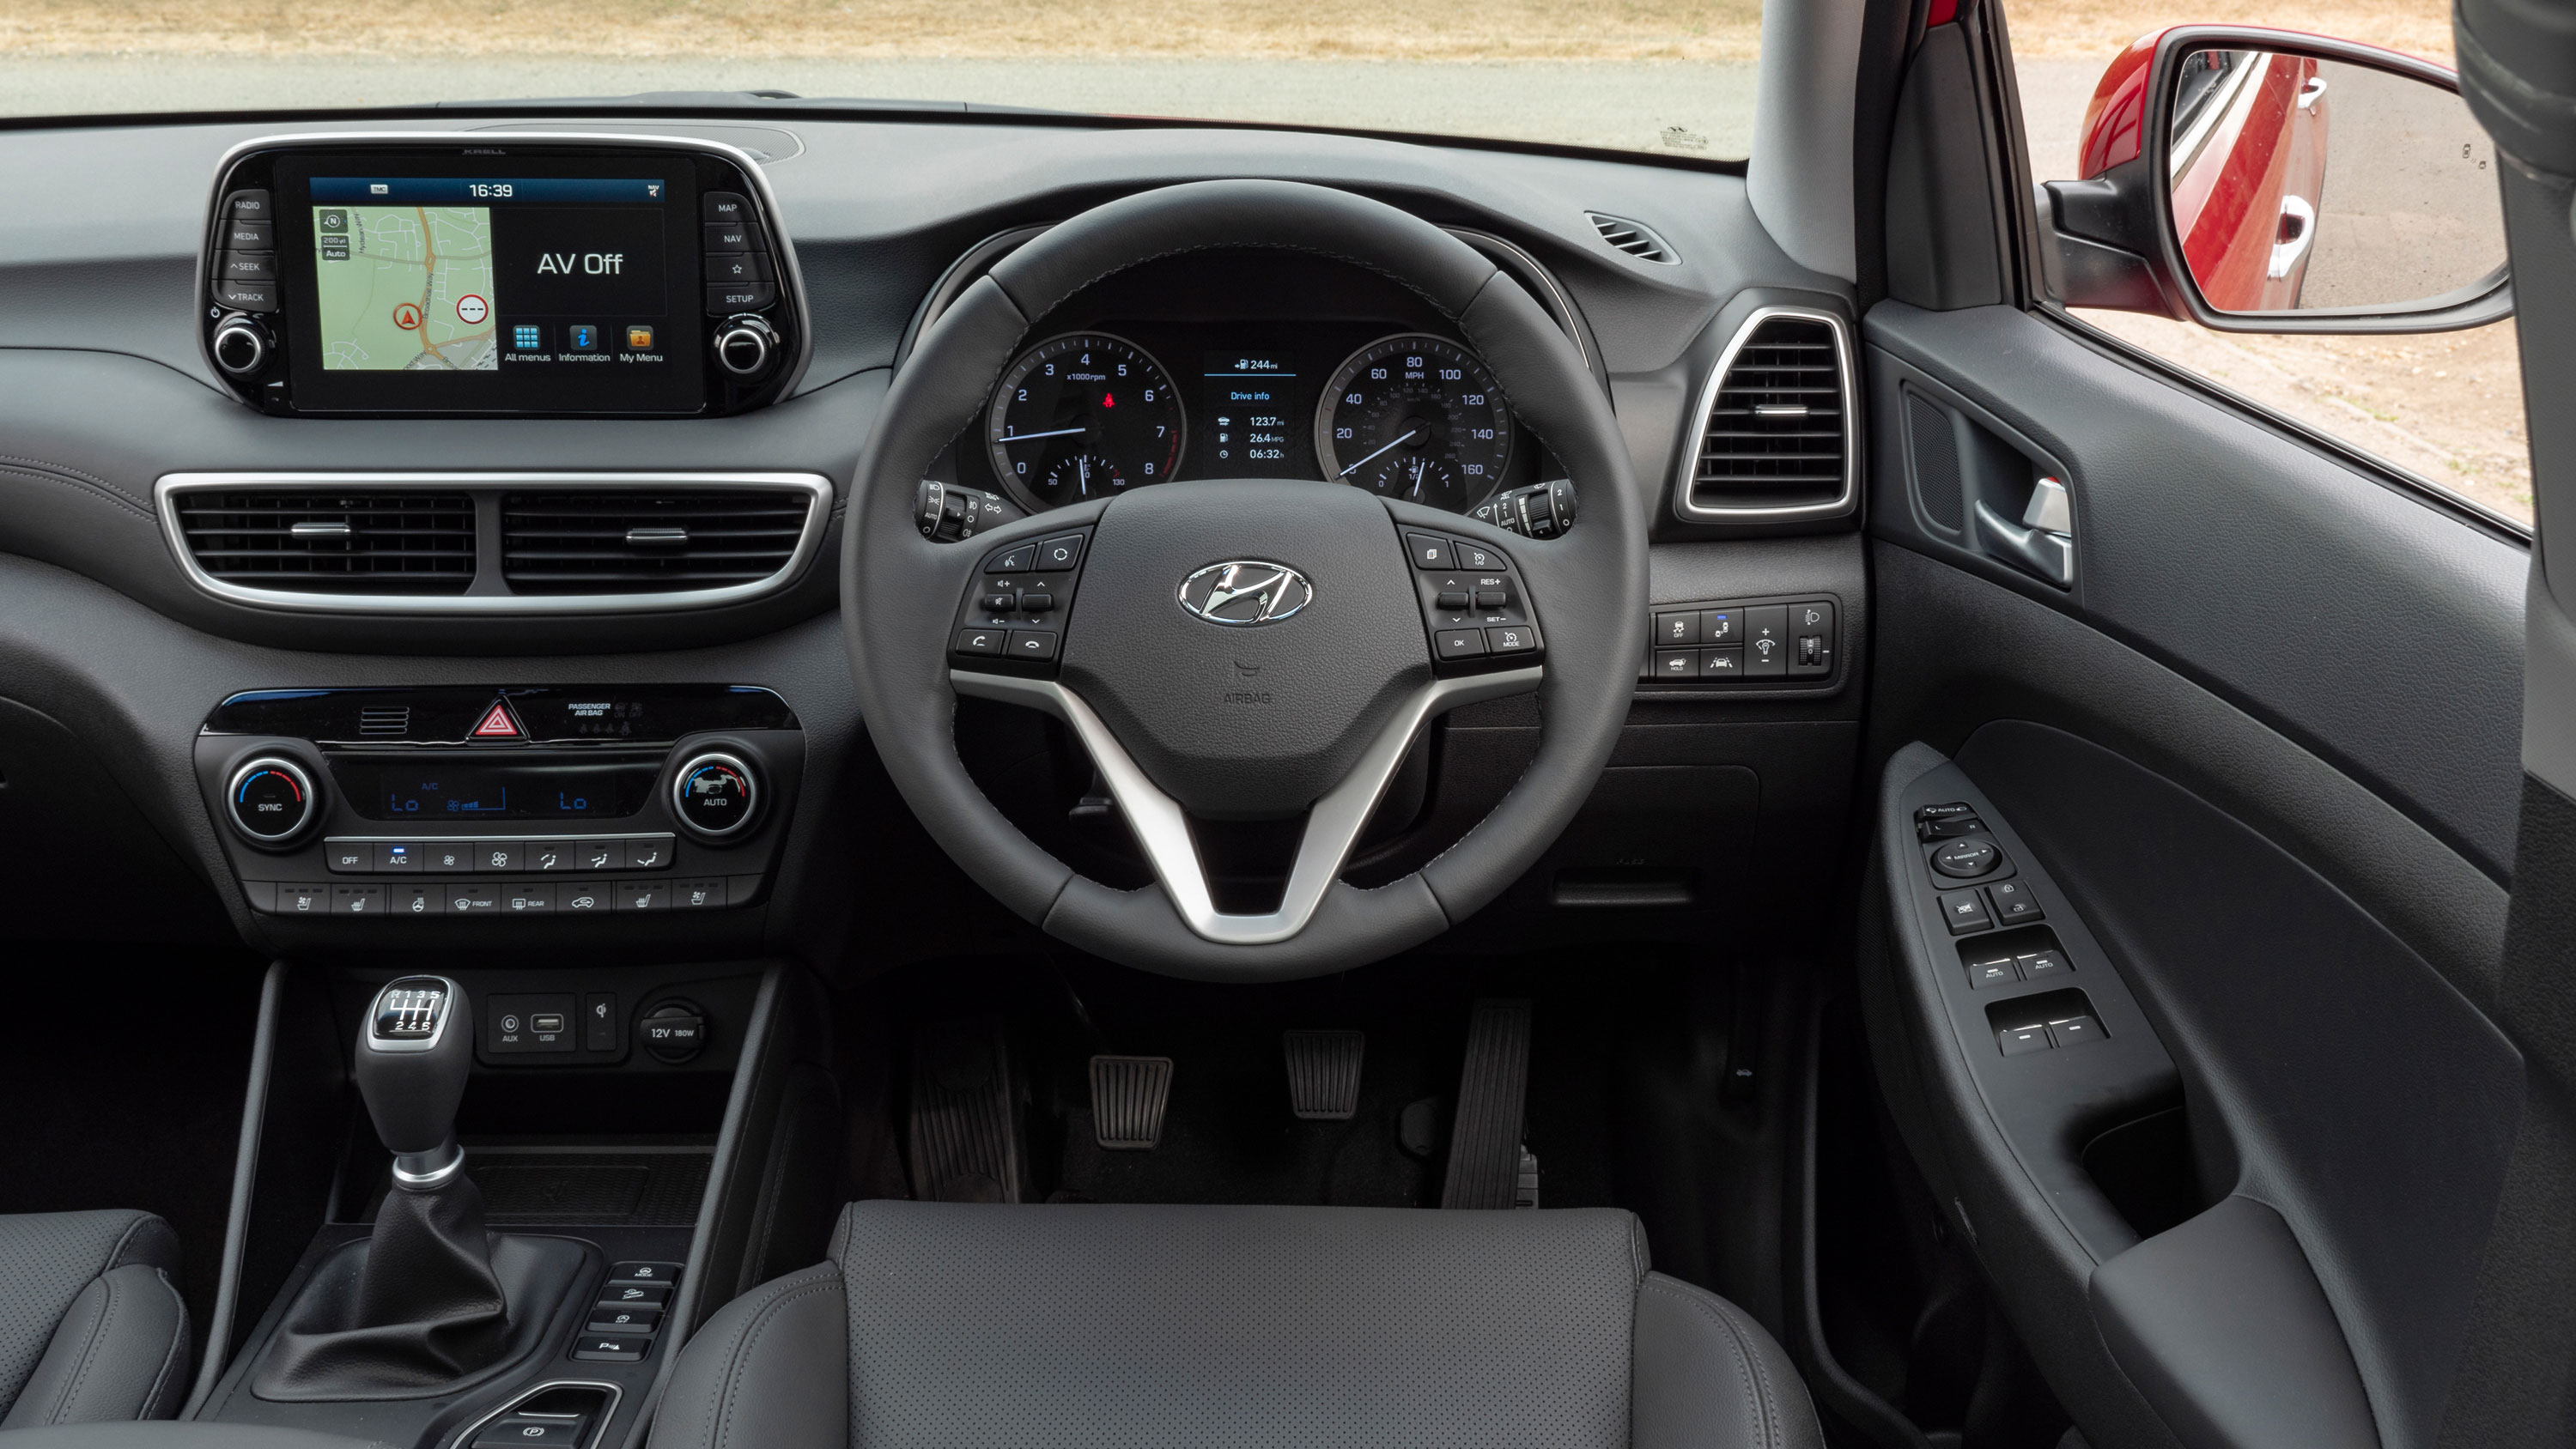 What Do You Want hyundai tucson To Become?